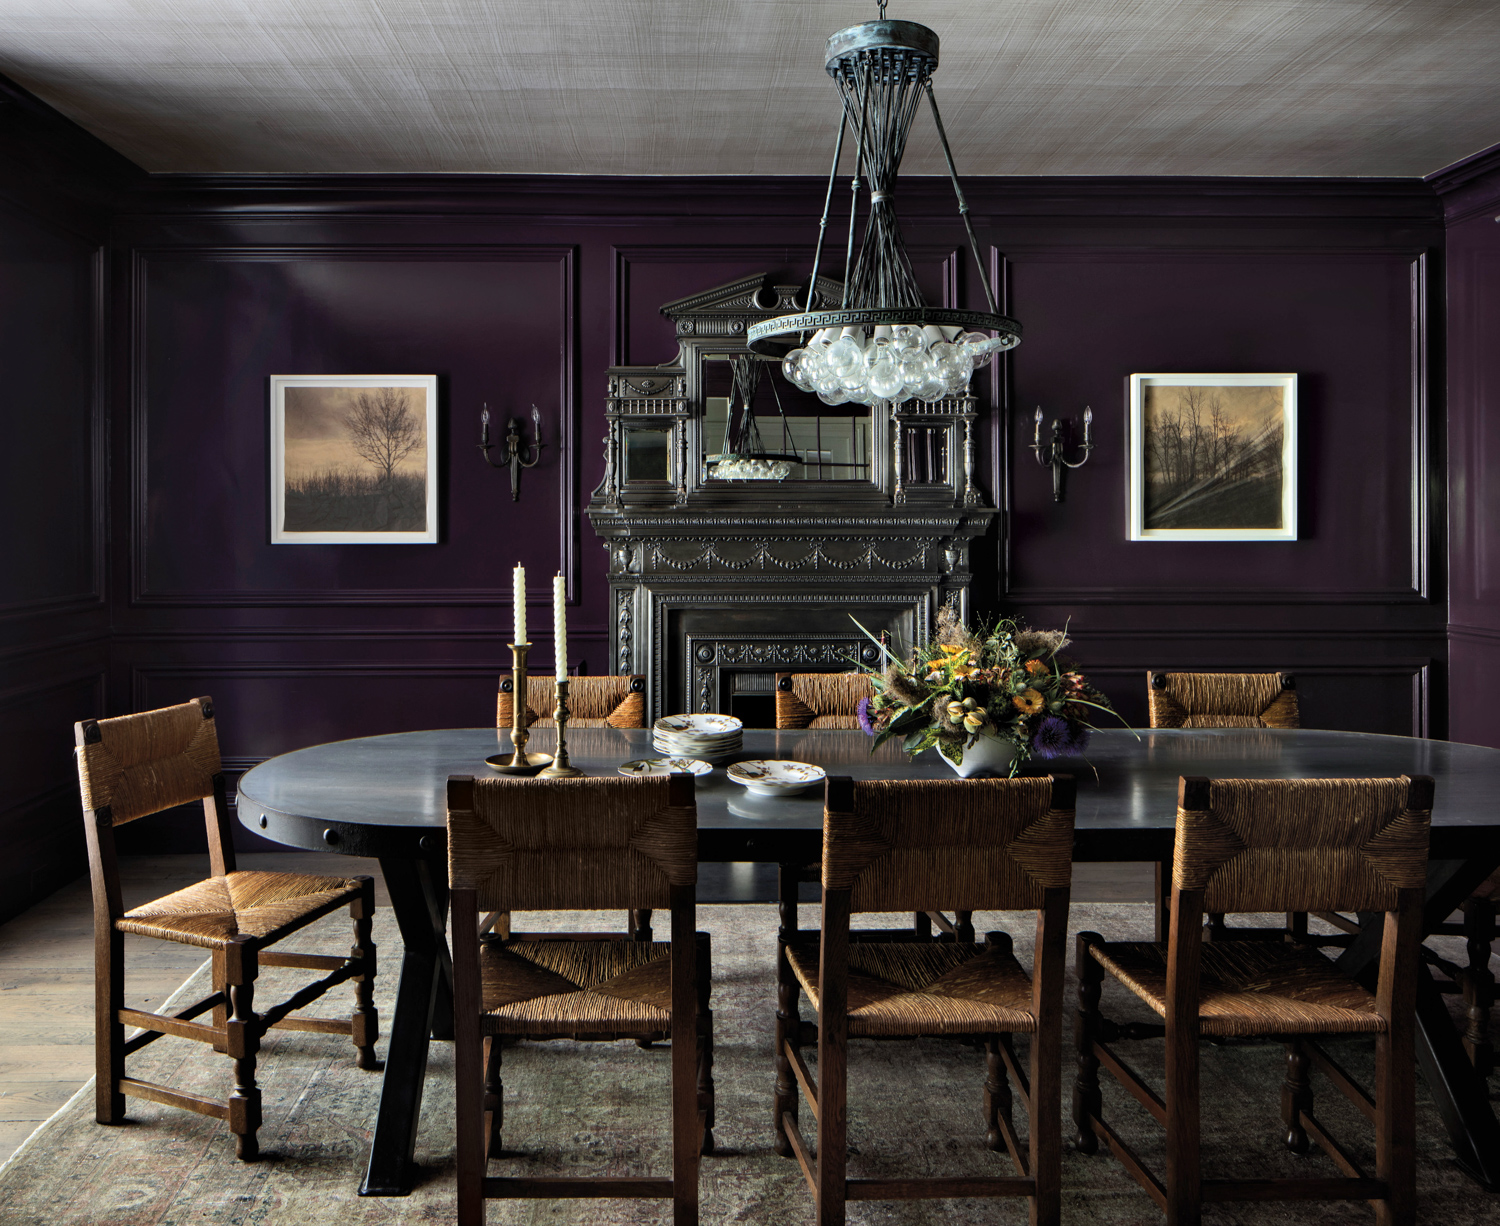 Dining room with dark walls, light fixture, black antique dining table, sepia artwork and French chairs